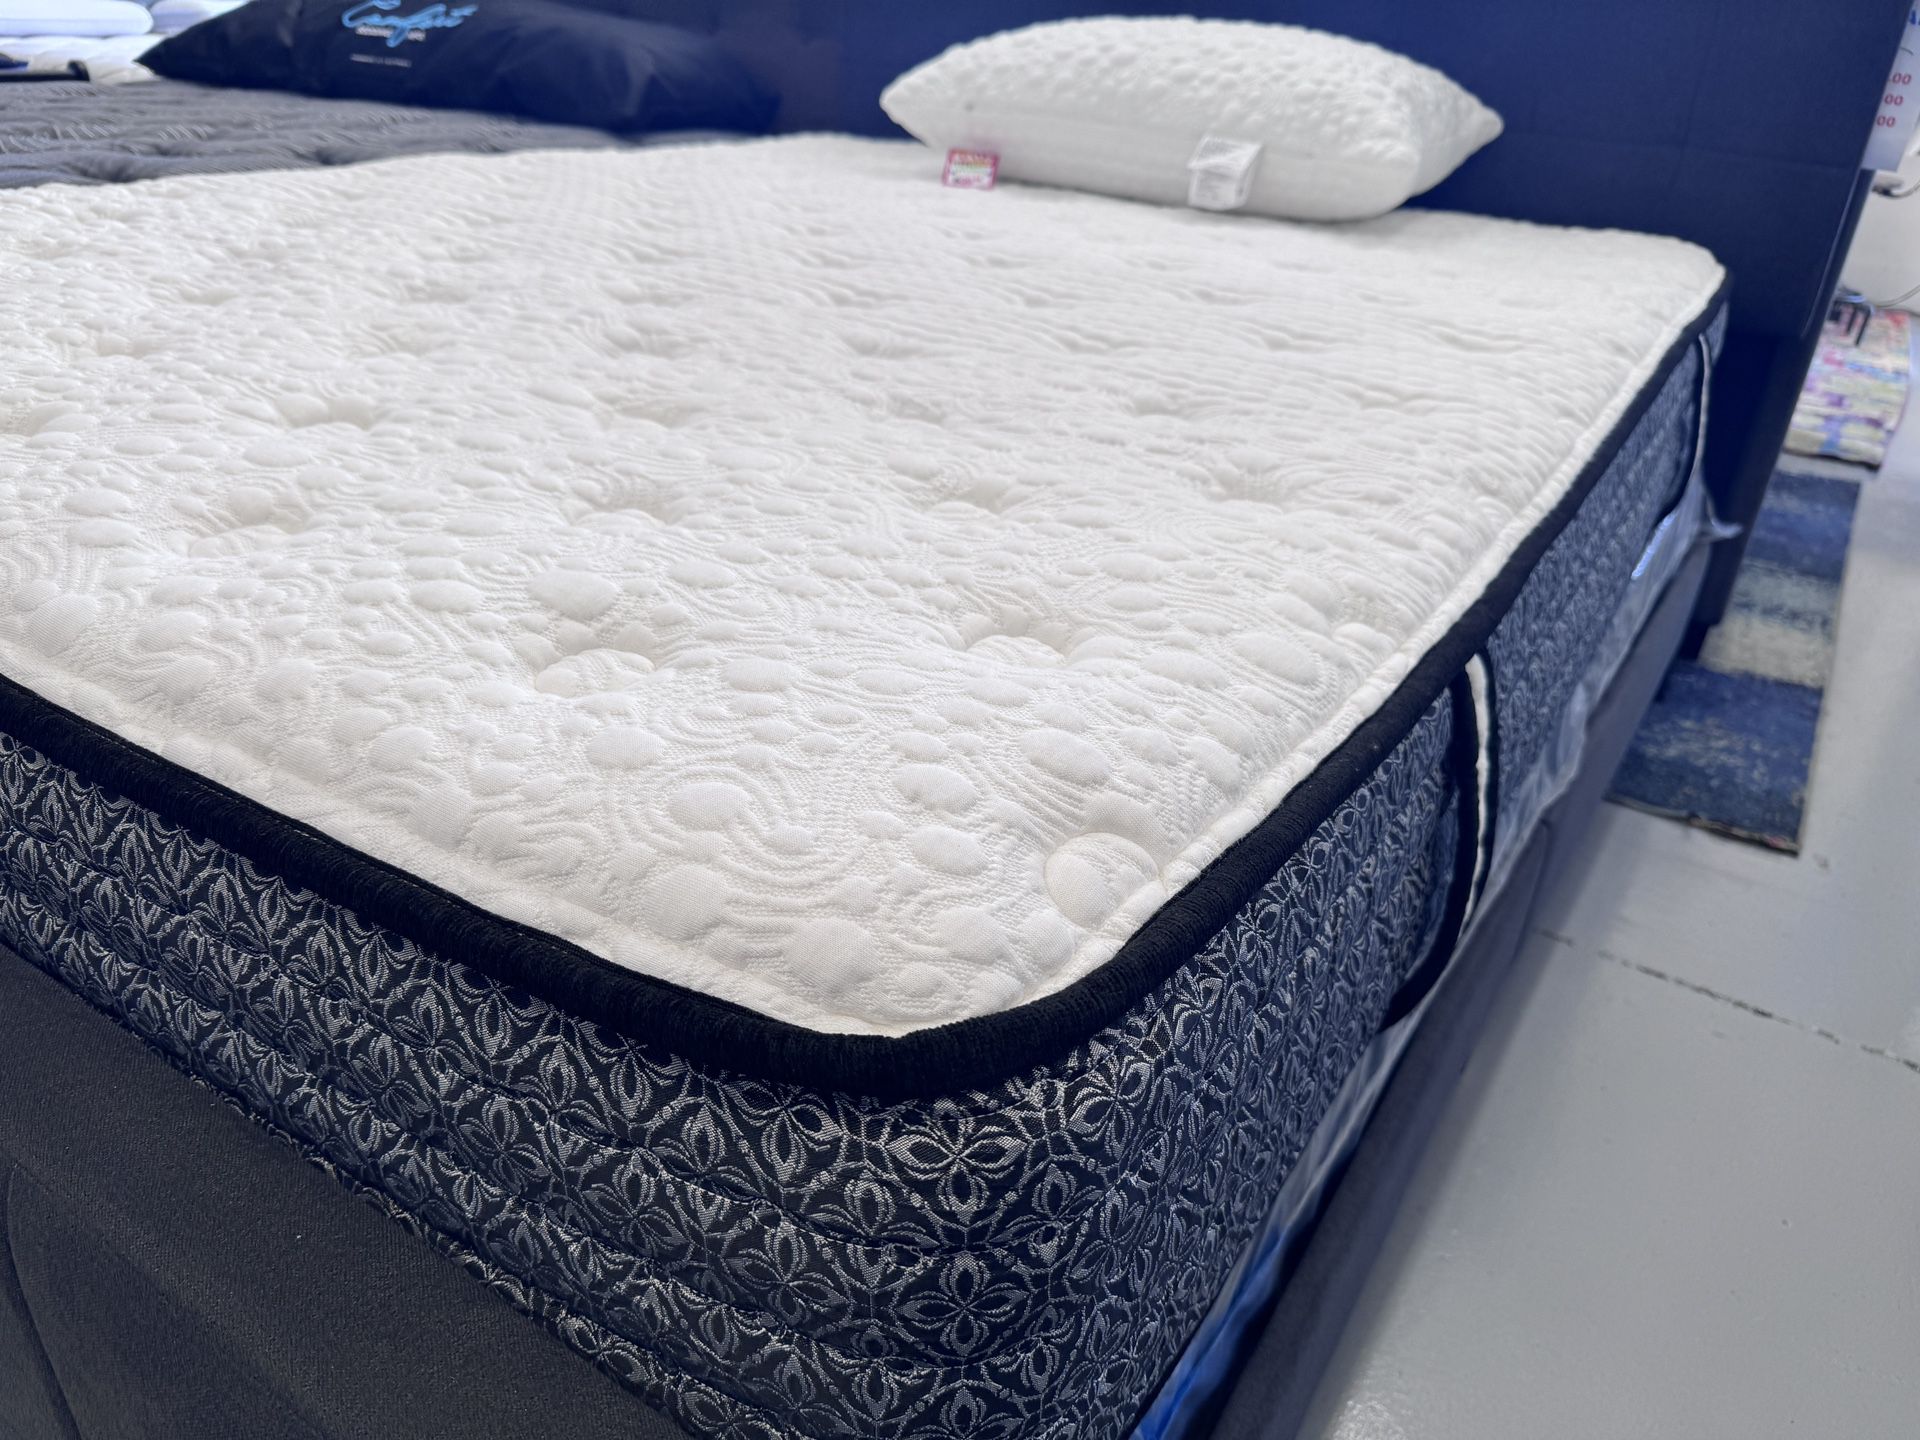 Made in Japan! New Quality Mattresses Only King $528 Queen $428 Full $368 